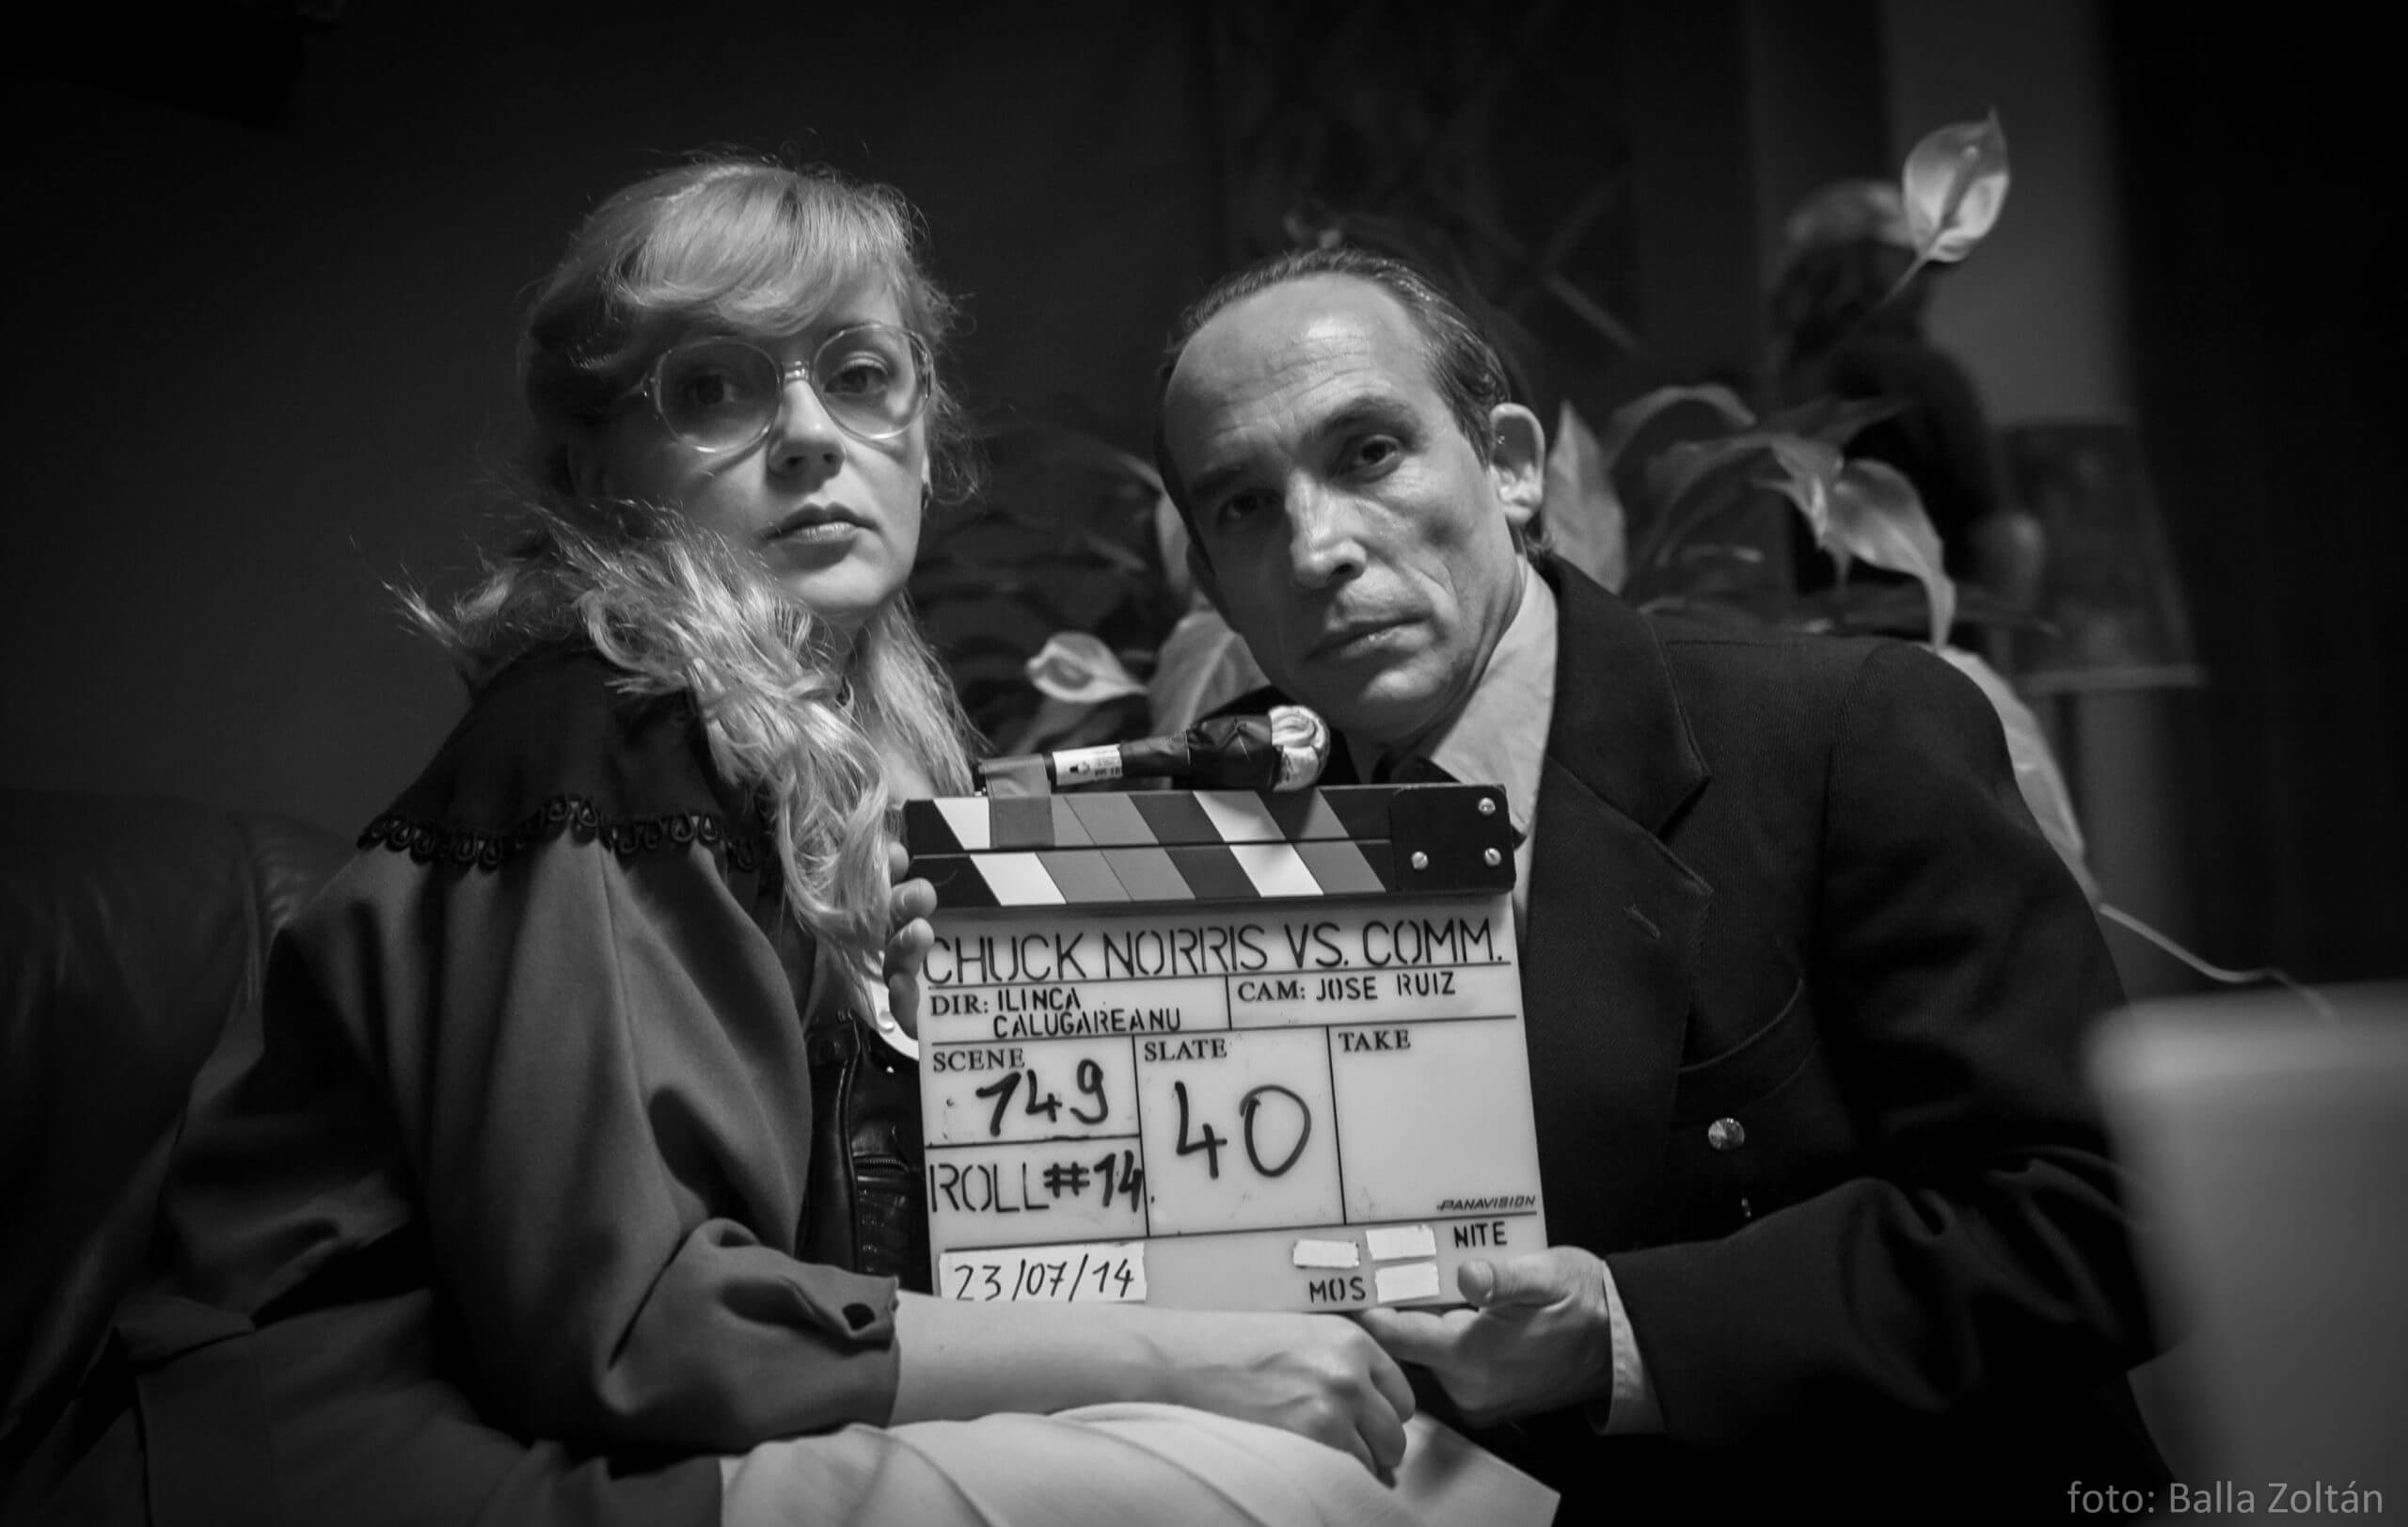 Still from Chuck Norris vs Communism. Ana Maria Moldovan and Dan Chiorean, the actors playing the film’s main characters, pose with the clapboard (photographer Balla Zoltán)